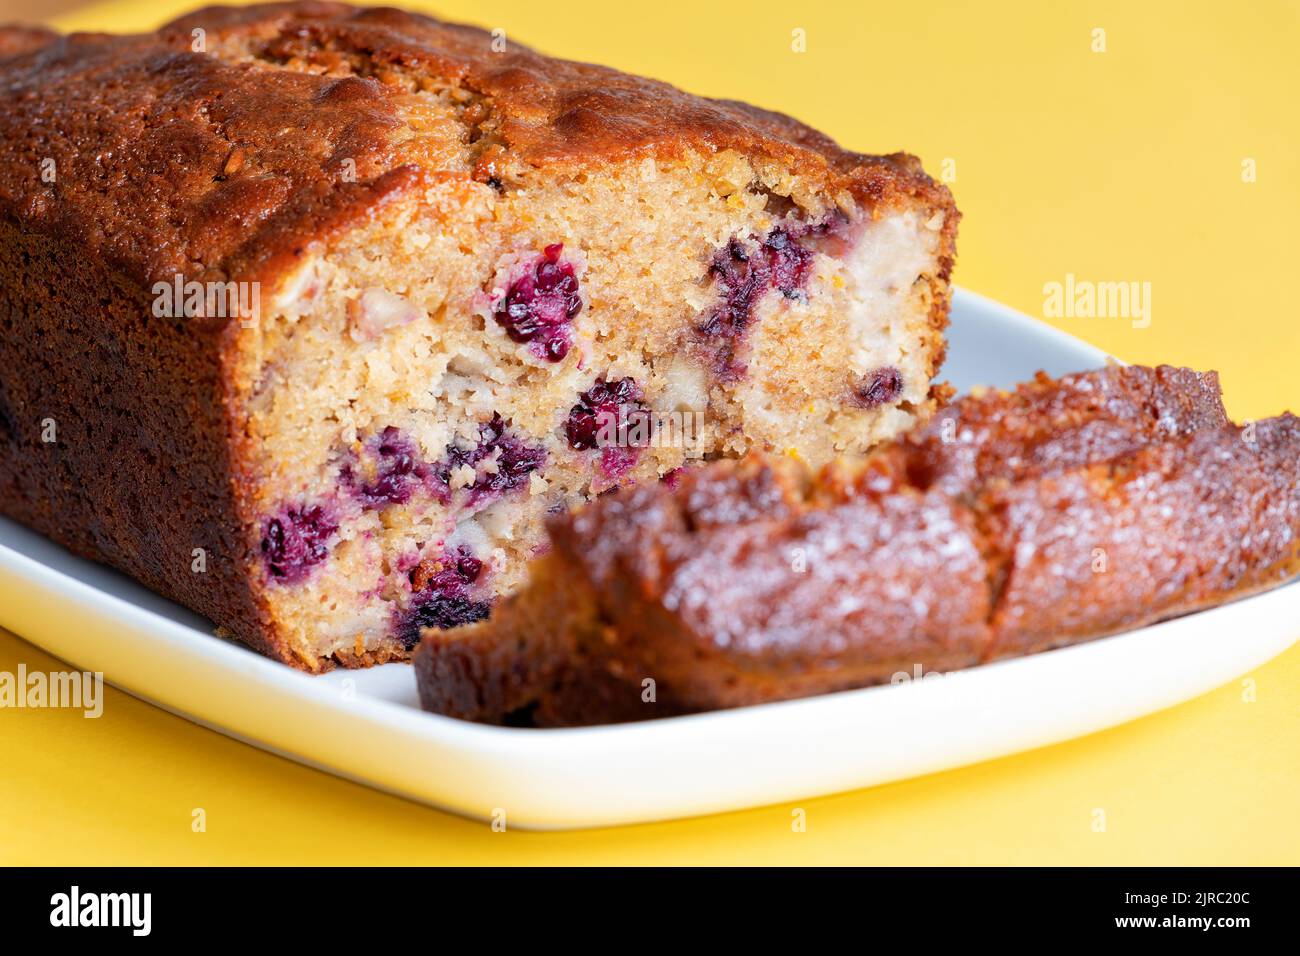 A freshly made Blackberry, apple and walnut cake. The cake has been made at home by the baker and is sliced showing the fruits inside the cake Stock Photo